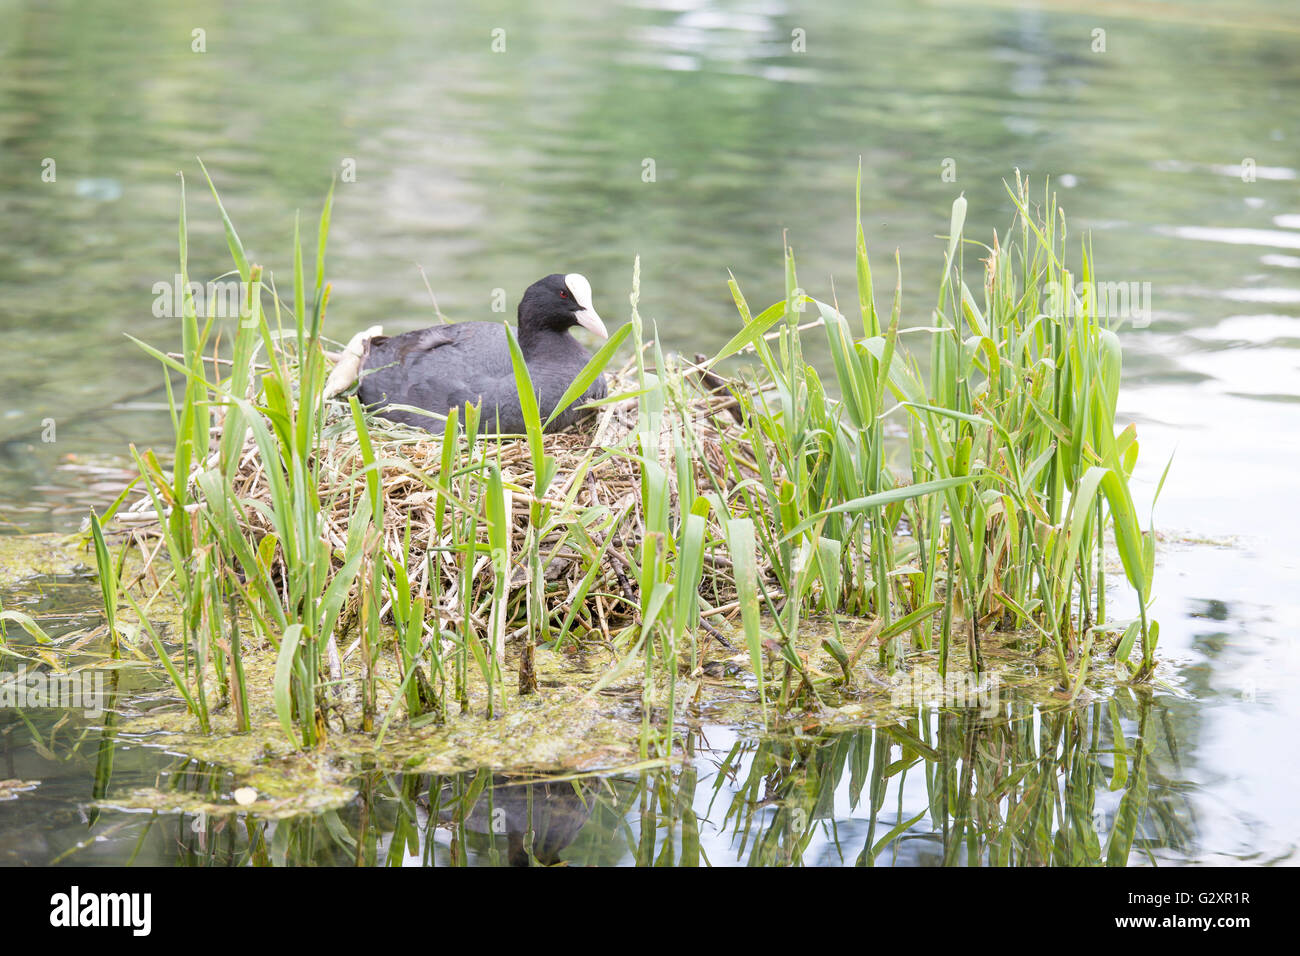 An Eurasian coot, Fulica atra, is hatching eggs in the its nest. This species builds a nest of dead reeds or grasses near the wa Stock Photo